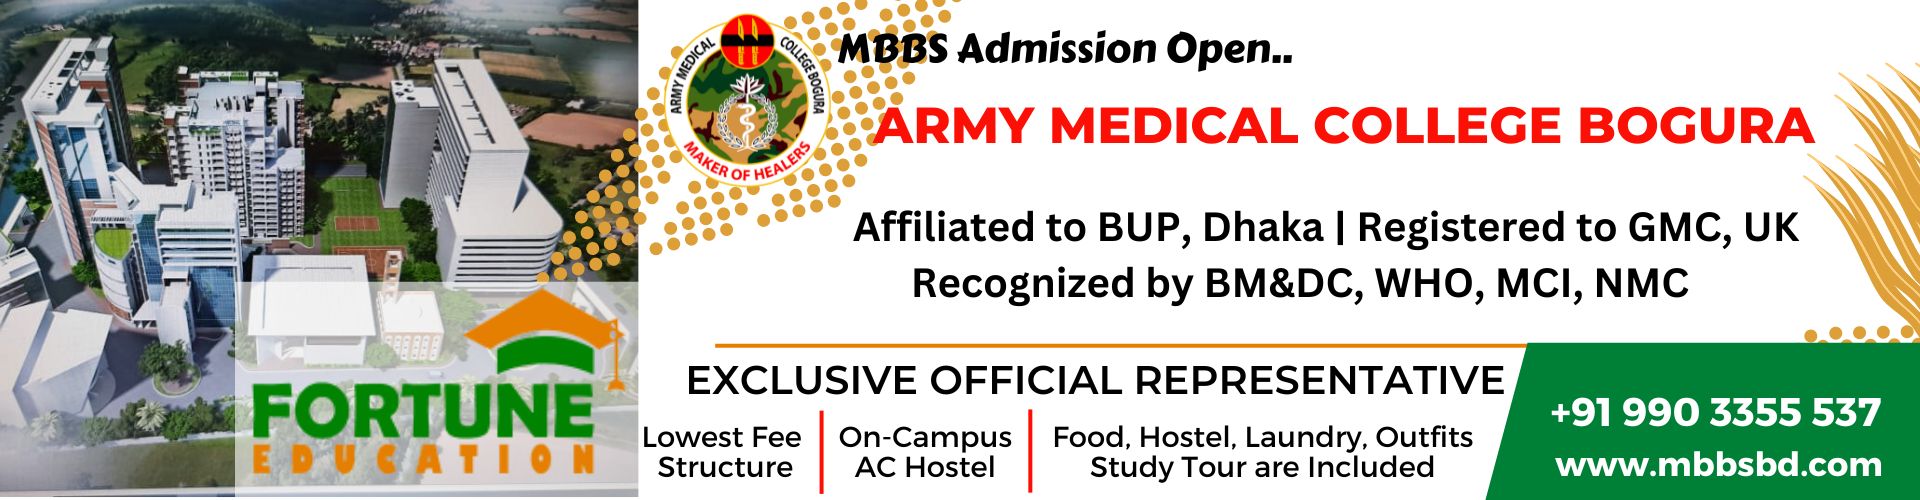 Army Medical College Banner